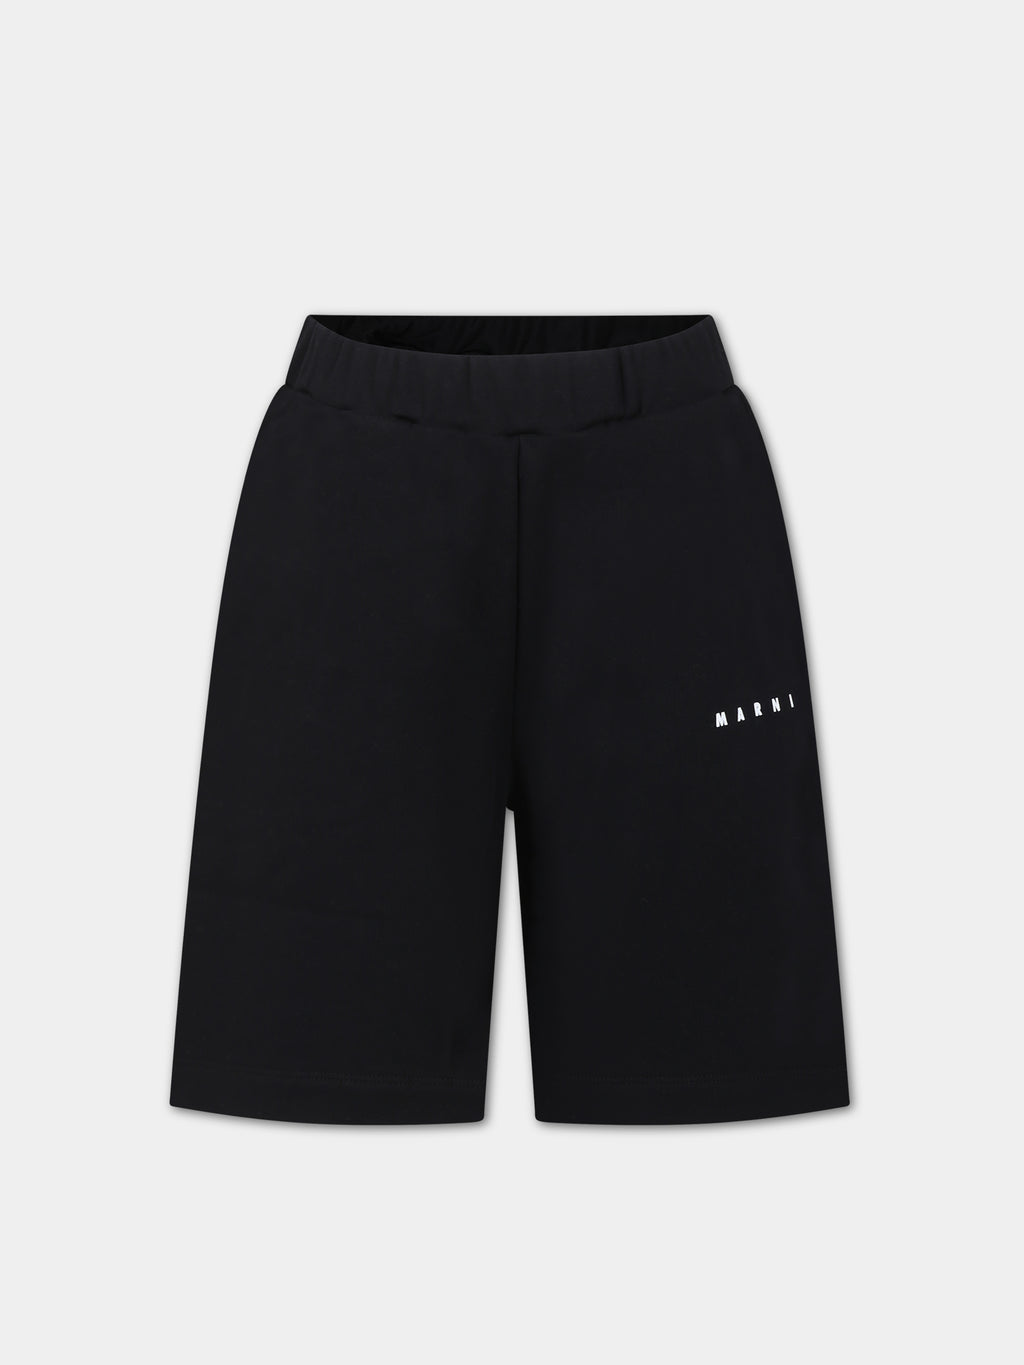 Black shorts for kids with logo